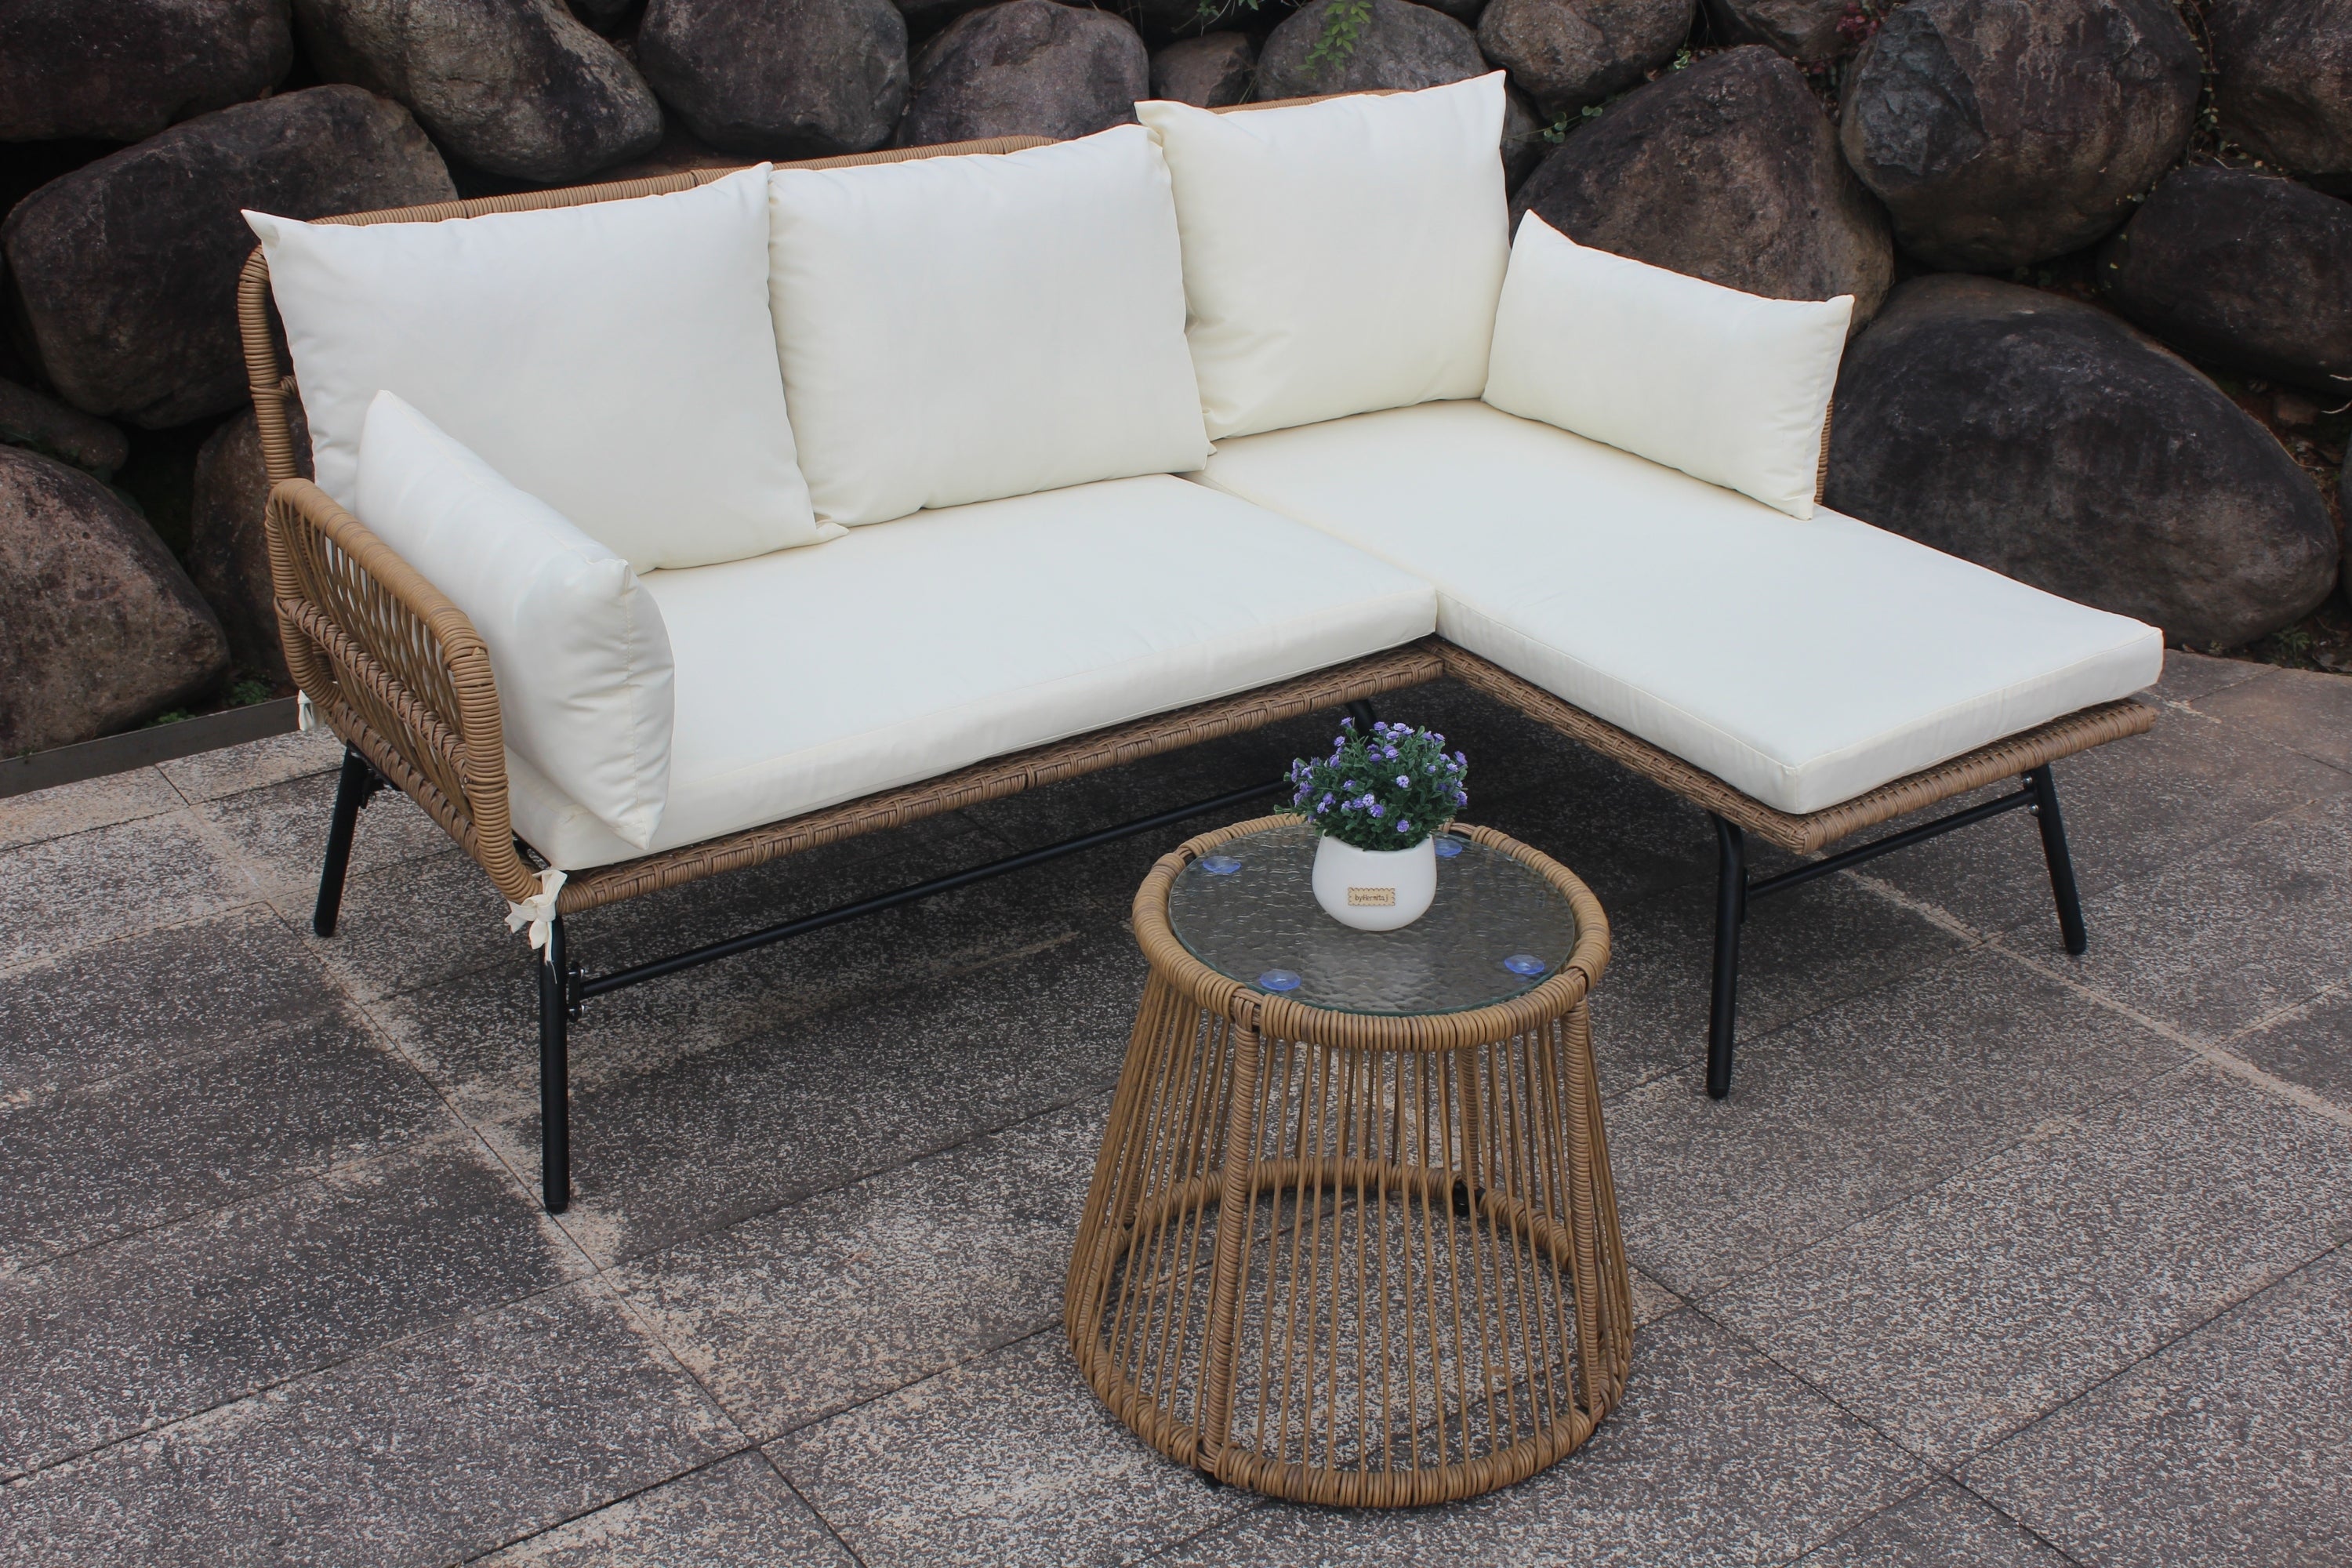 3 Pcs Patio PE Wicker Sofa Set with Beige Cushion, Tempered Glass Table and Furniture Cover